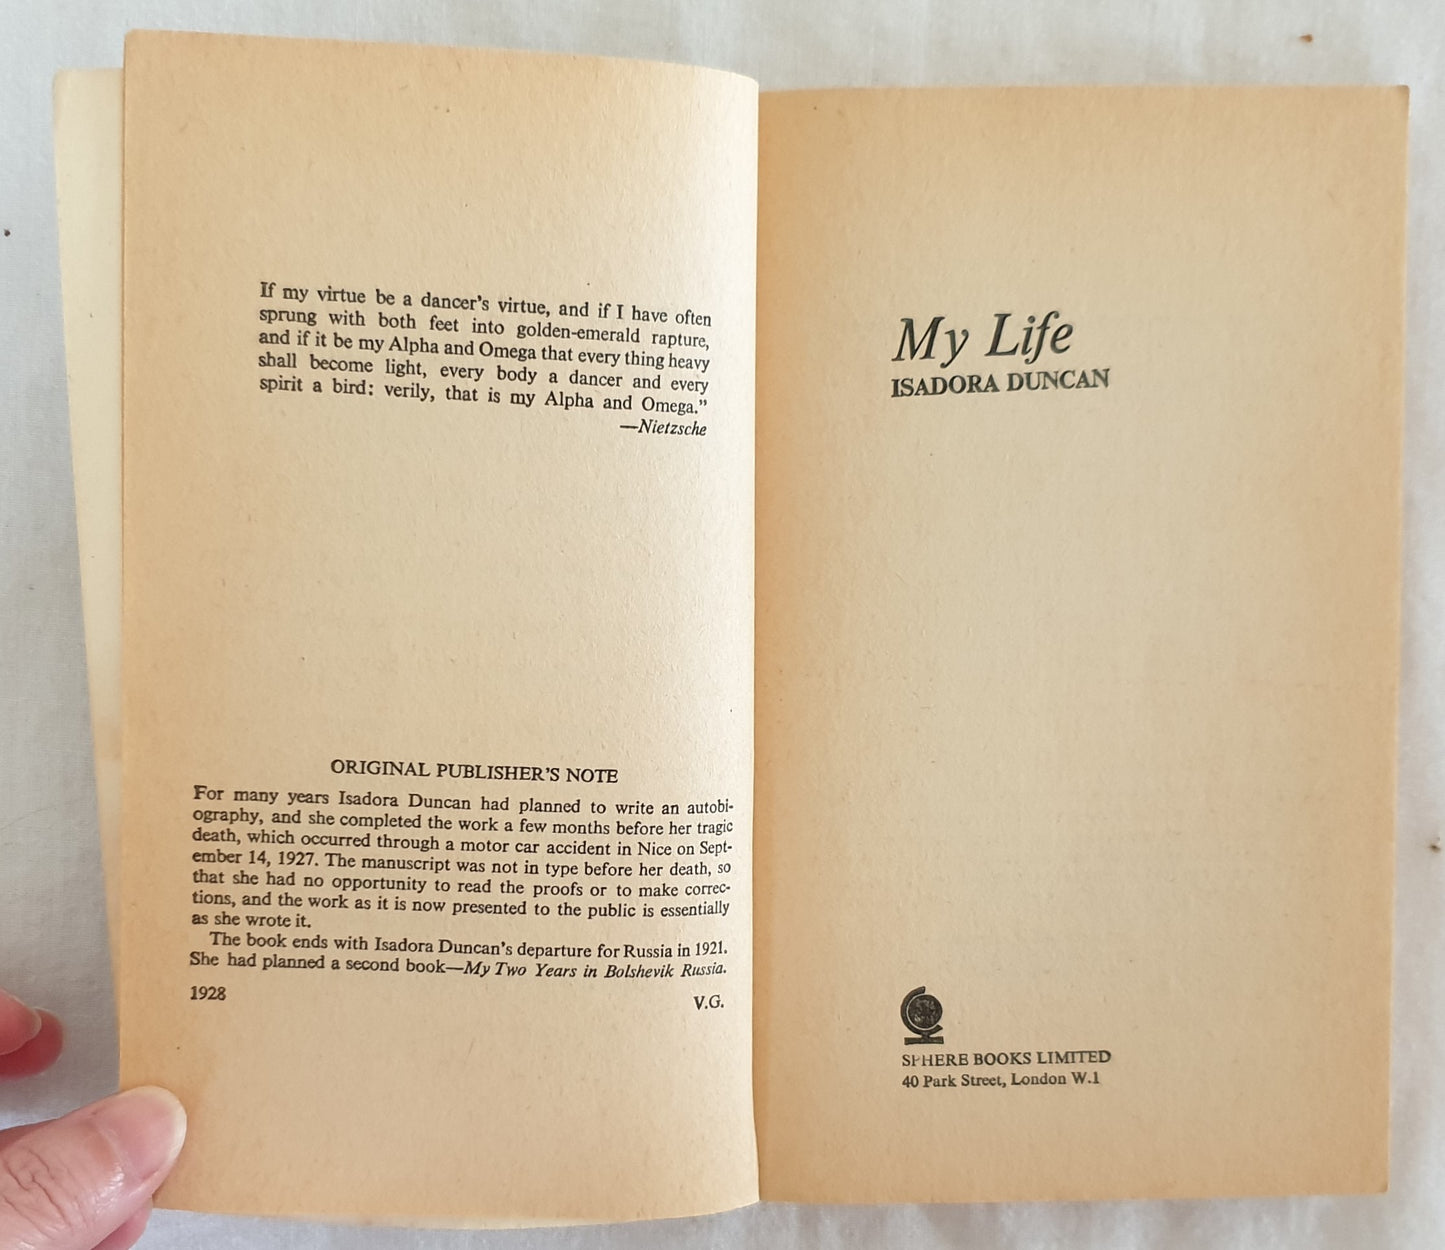 My Life by Isadora Duncan